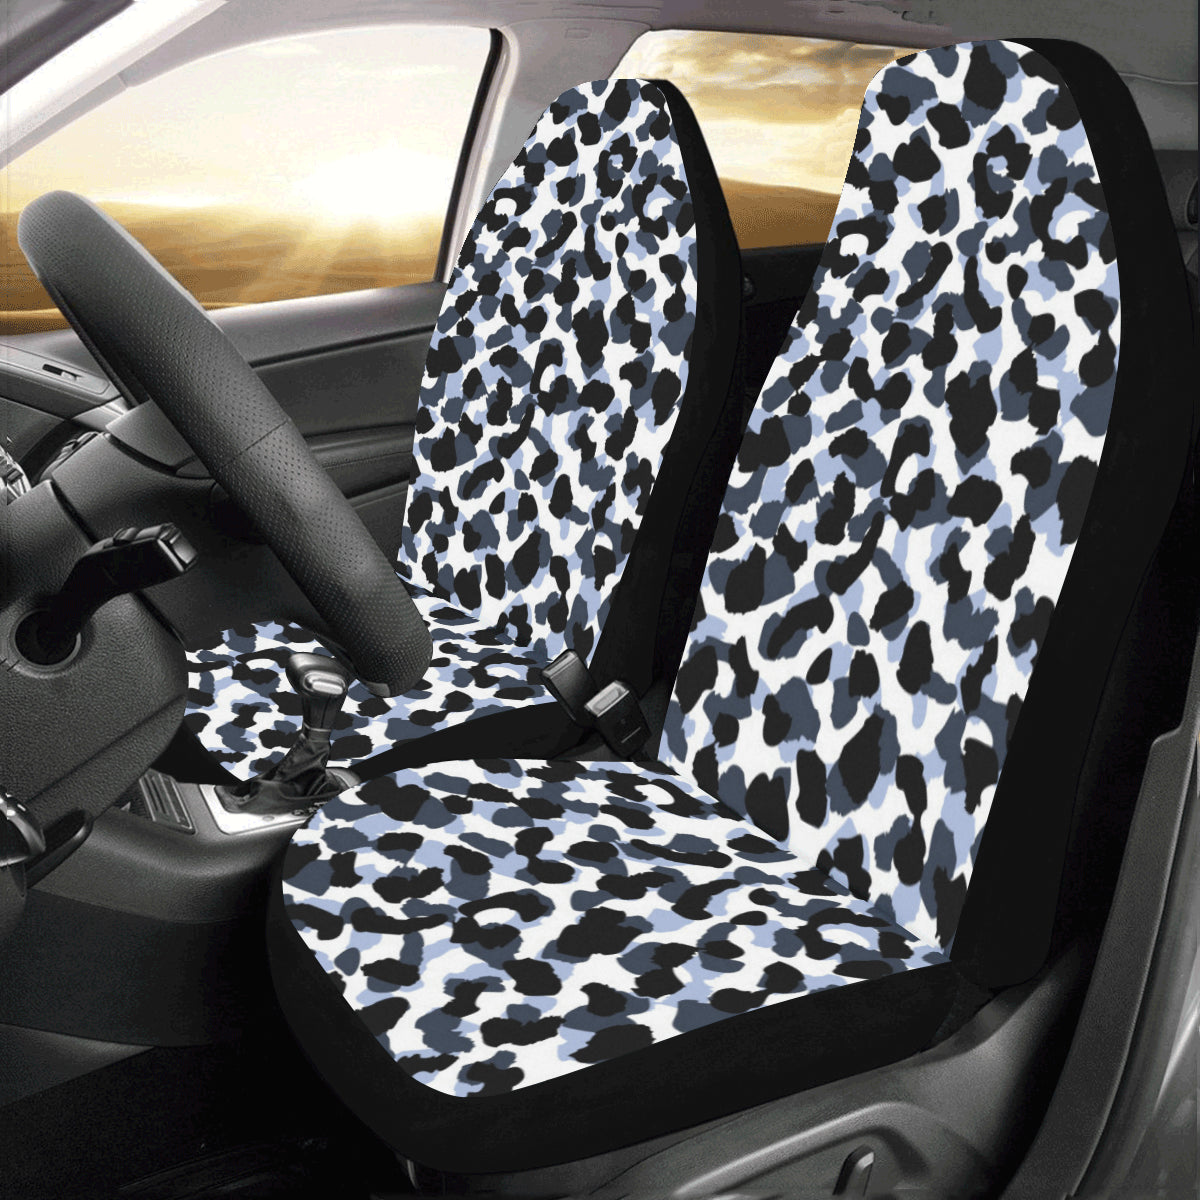 Leopard Car Seat Covers for Vehicle 2 pc, Animal Print Cheetah Pattern Front Seat Covers, Car SUV Gift Her Protector Accessory Decoration Starcove Fashion